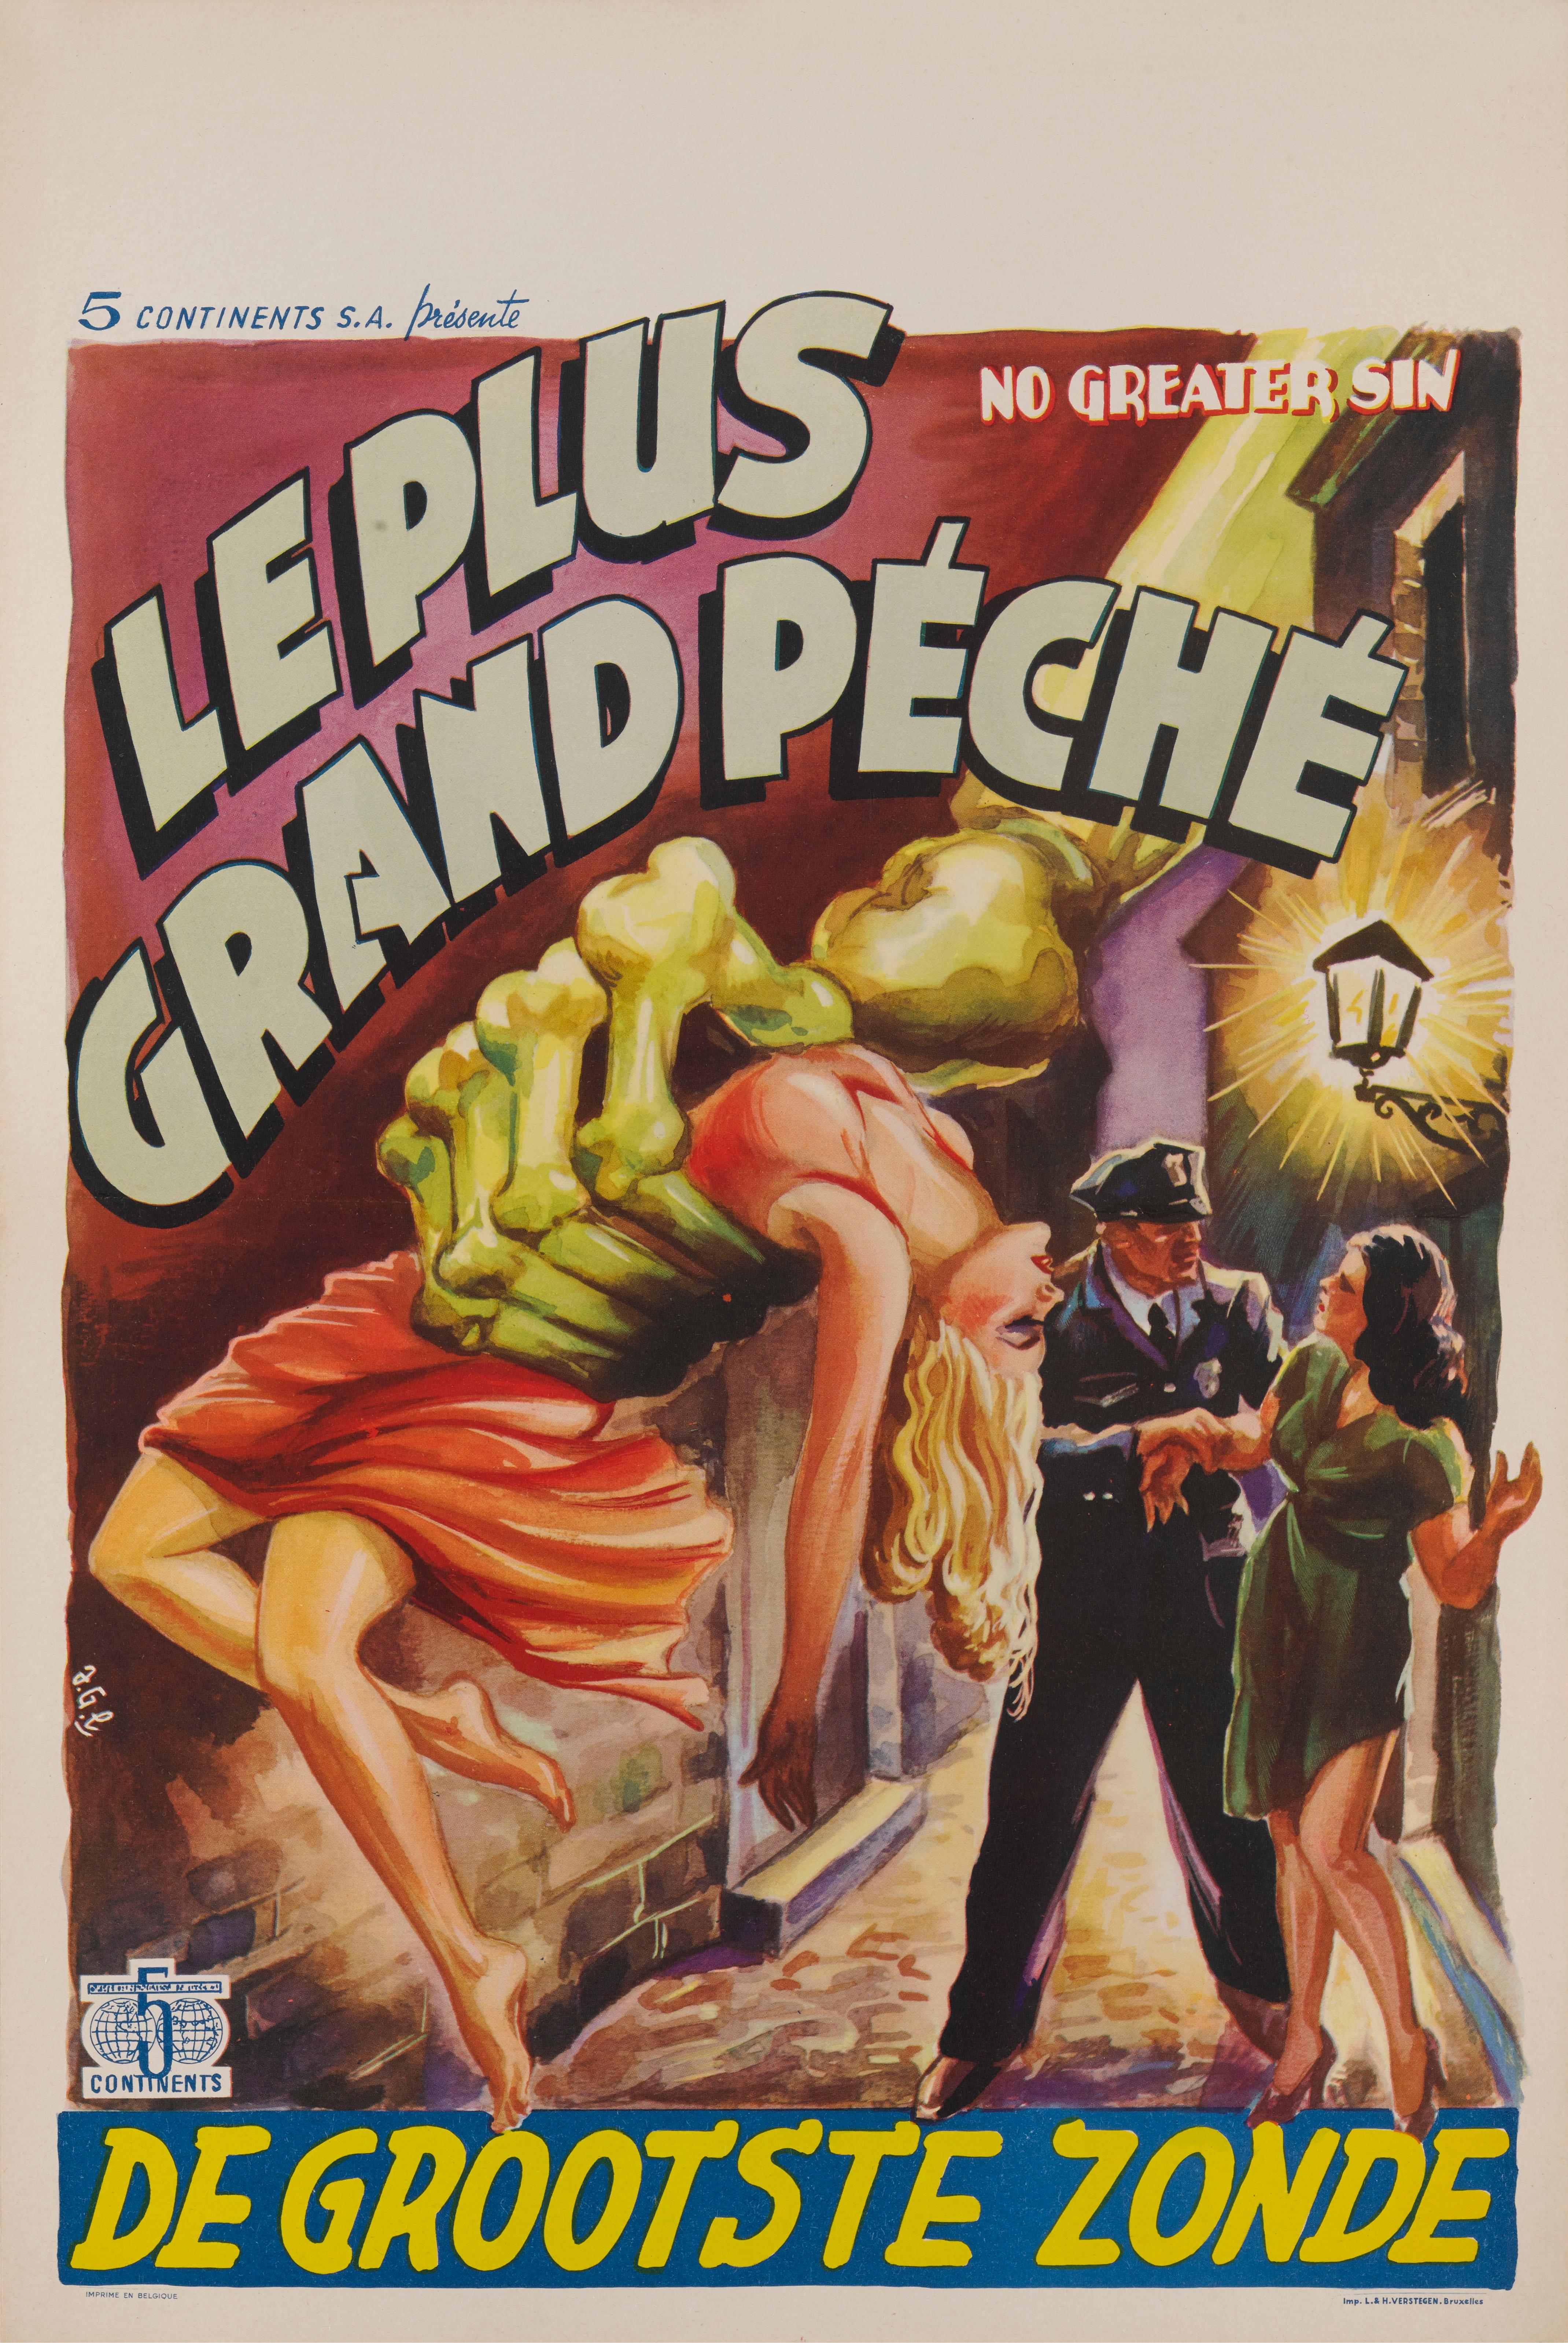 Original Belgian film poster for the 1941 Exploitation film directed by William high and starring LeonAmes, Launa Walters.
The film would not have been released in Belgium until after WWII and this poster is from the first release in the country.